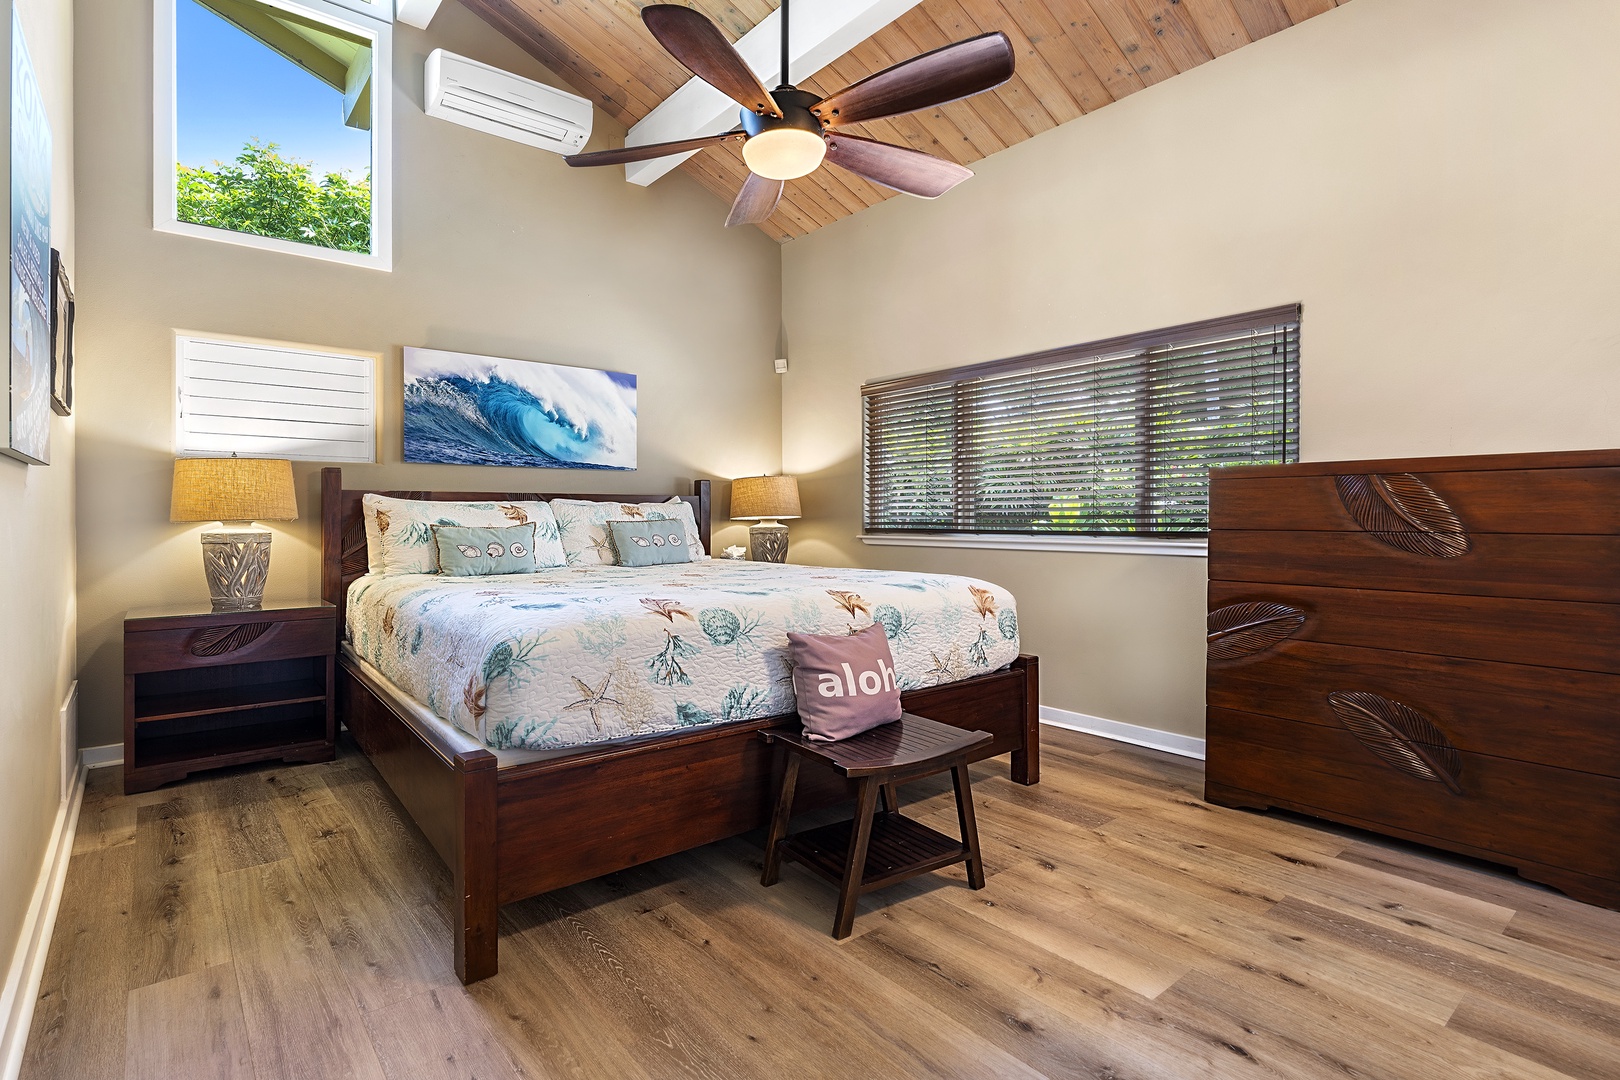 Kailua Kona Vacation Rentals, Hale Pua - Surfs Up Suite equipped with King bed, A/C and ensuite